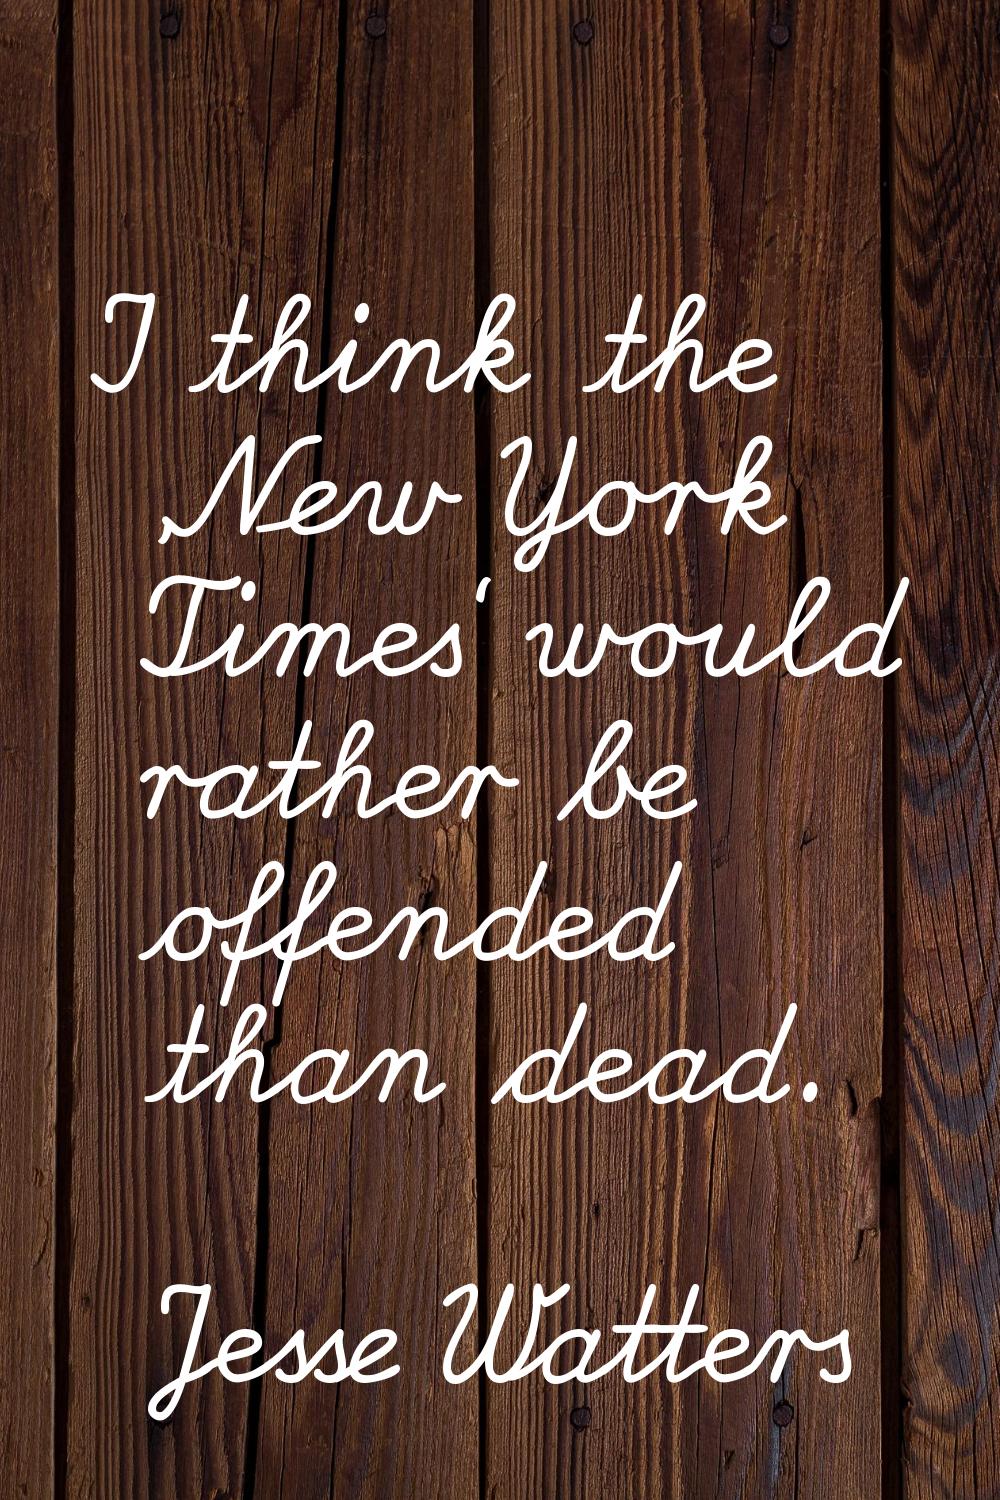 I think the 'New York Times' would rather be offended than dead.